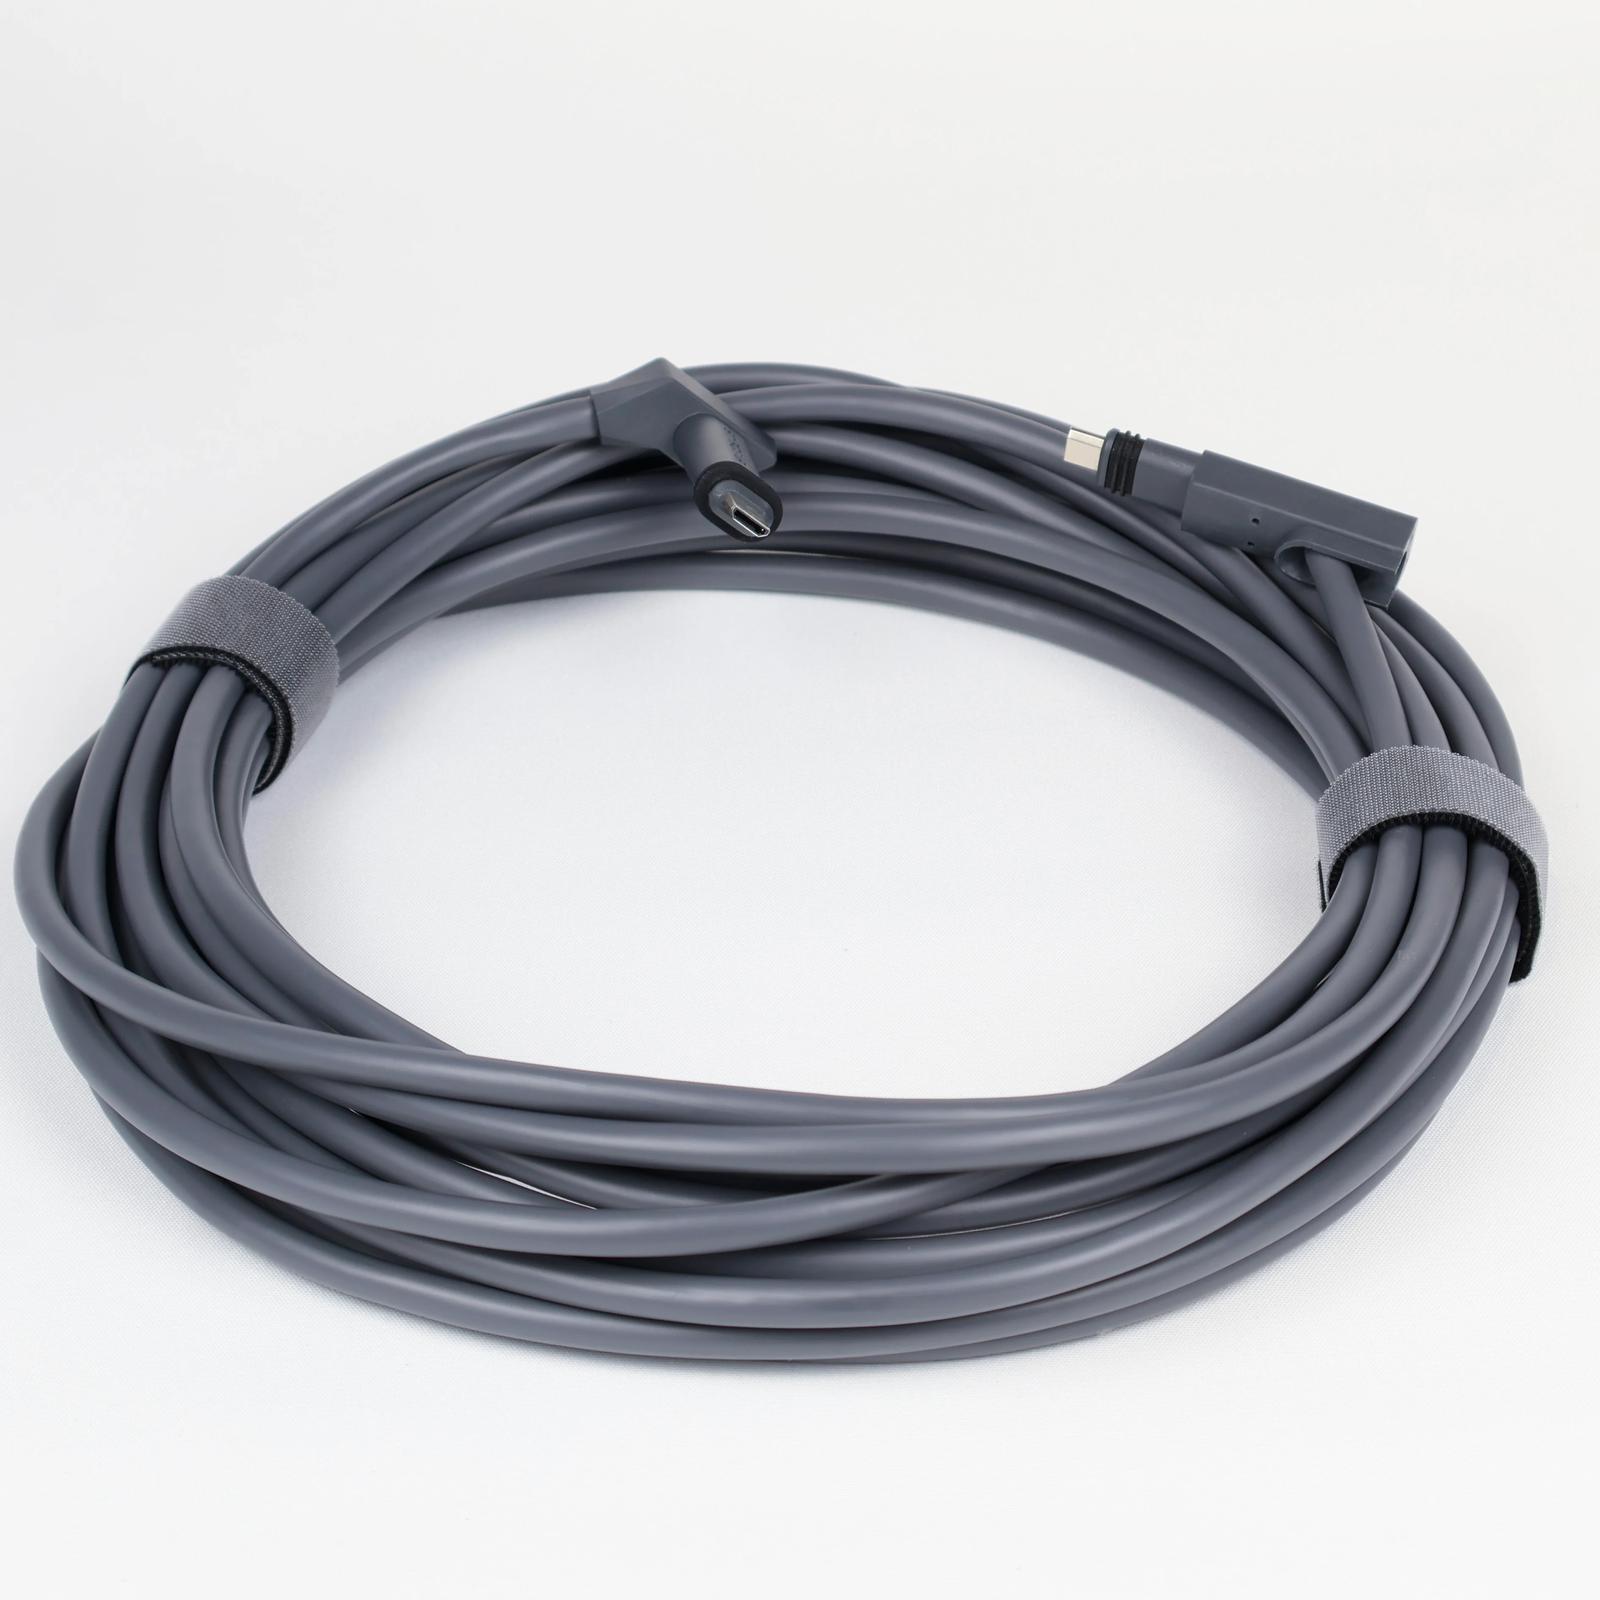 Starlink SPX Cable - 10m (32ft) - EVAAM